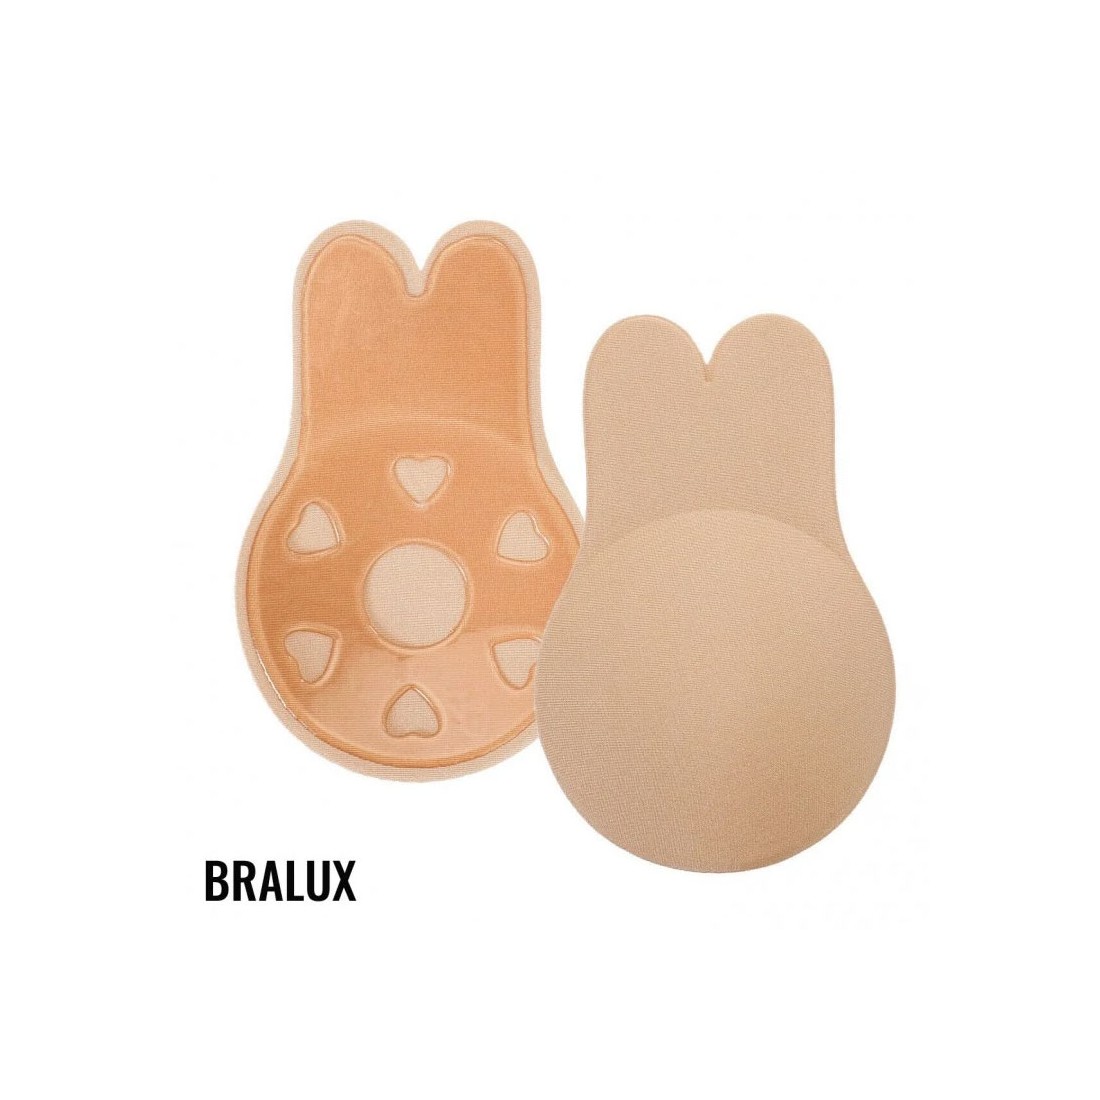 Bralux™ Seamless Fabric Adhesive Breast Lifts - Beige